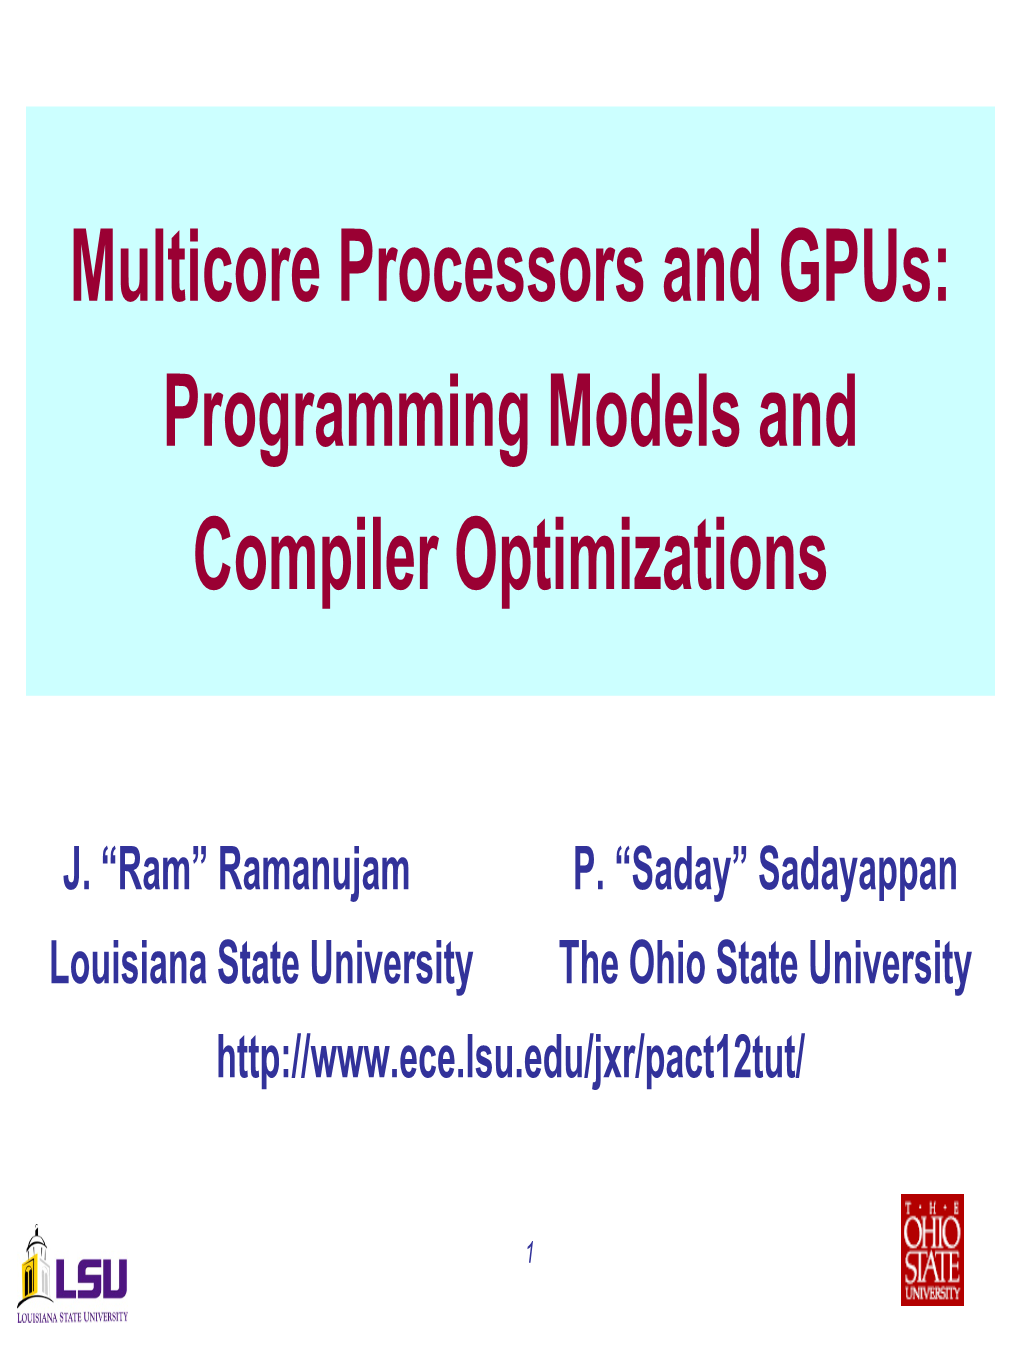 Multicore Processors and Gpus: Programming Models and Compiler Optimizations